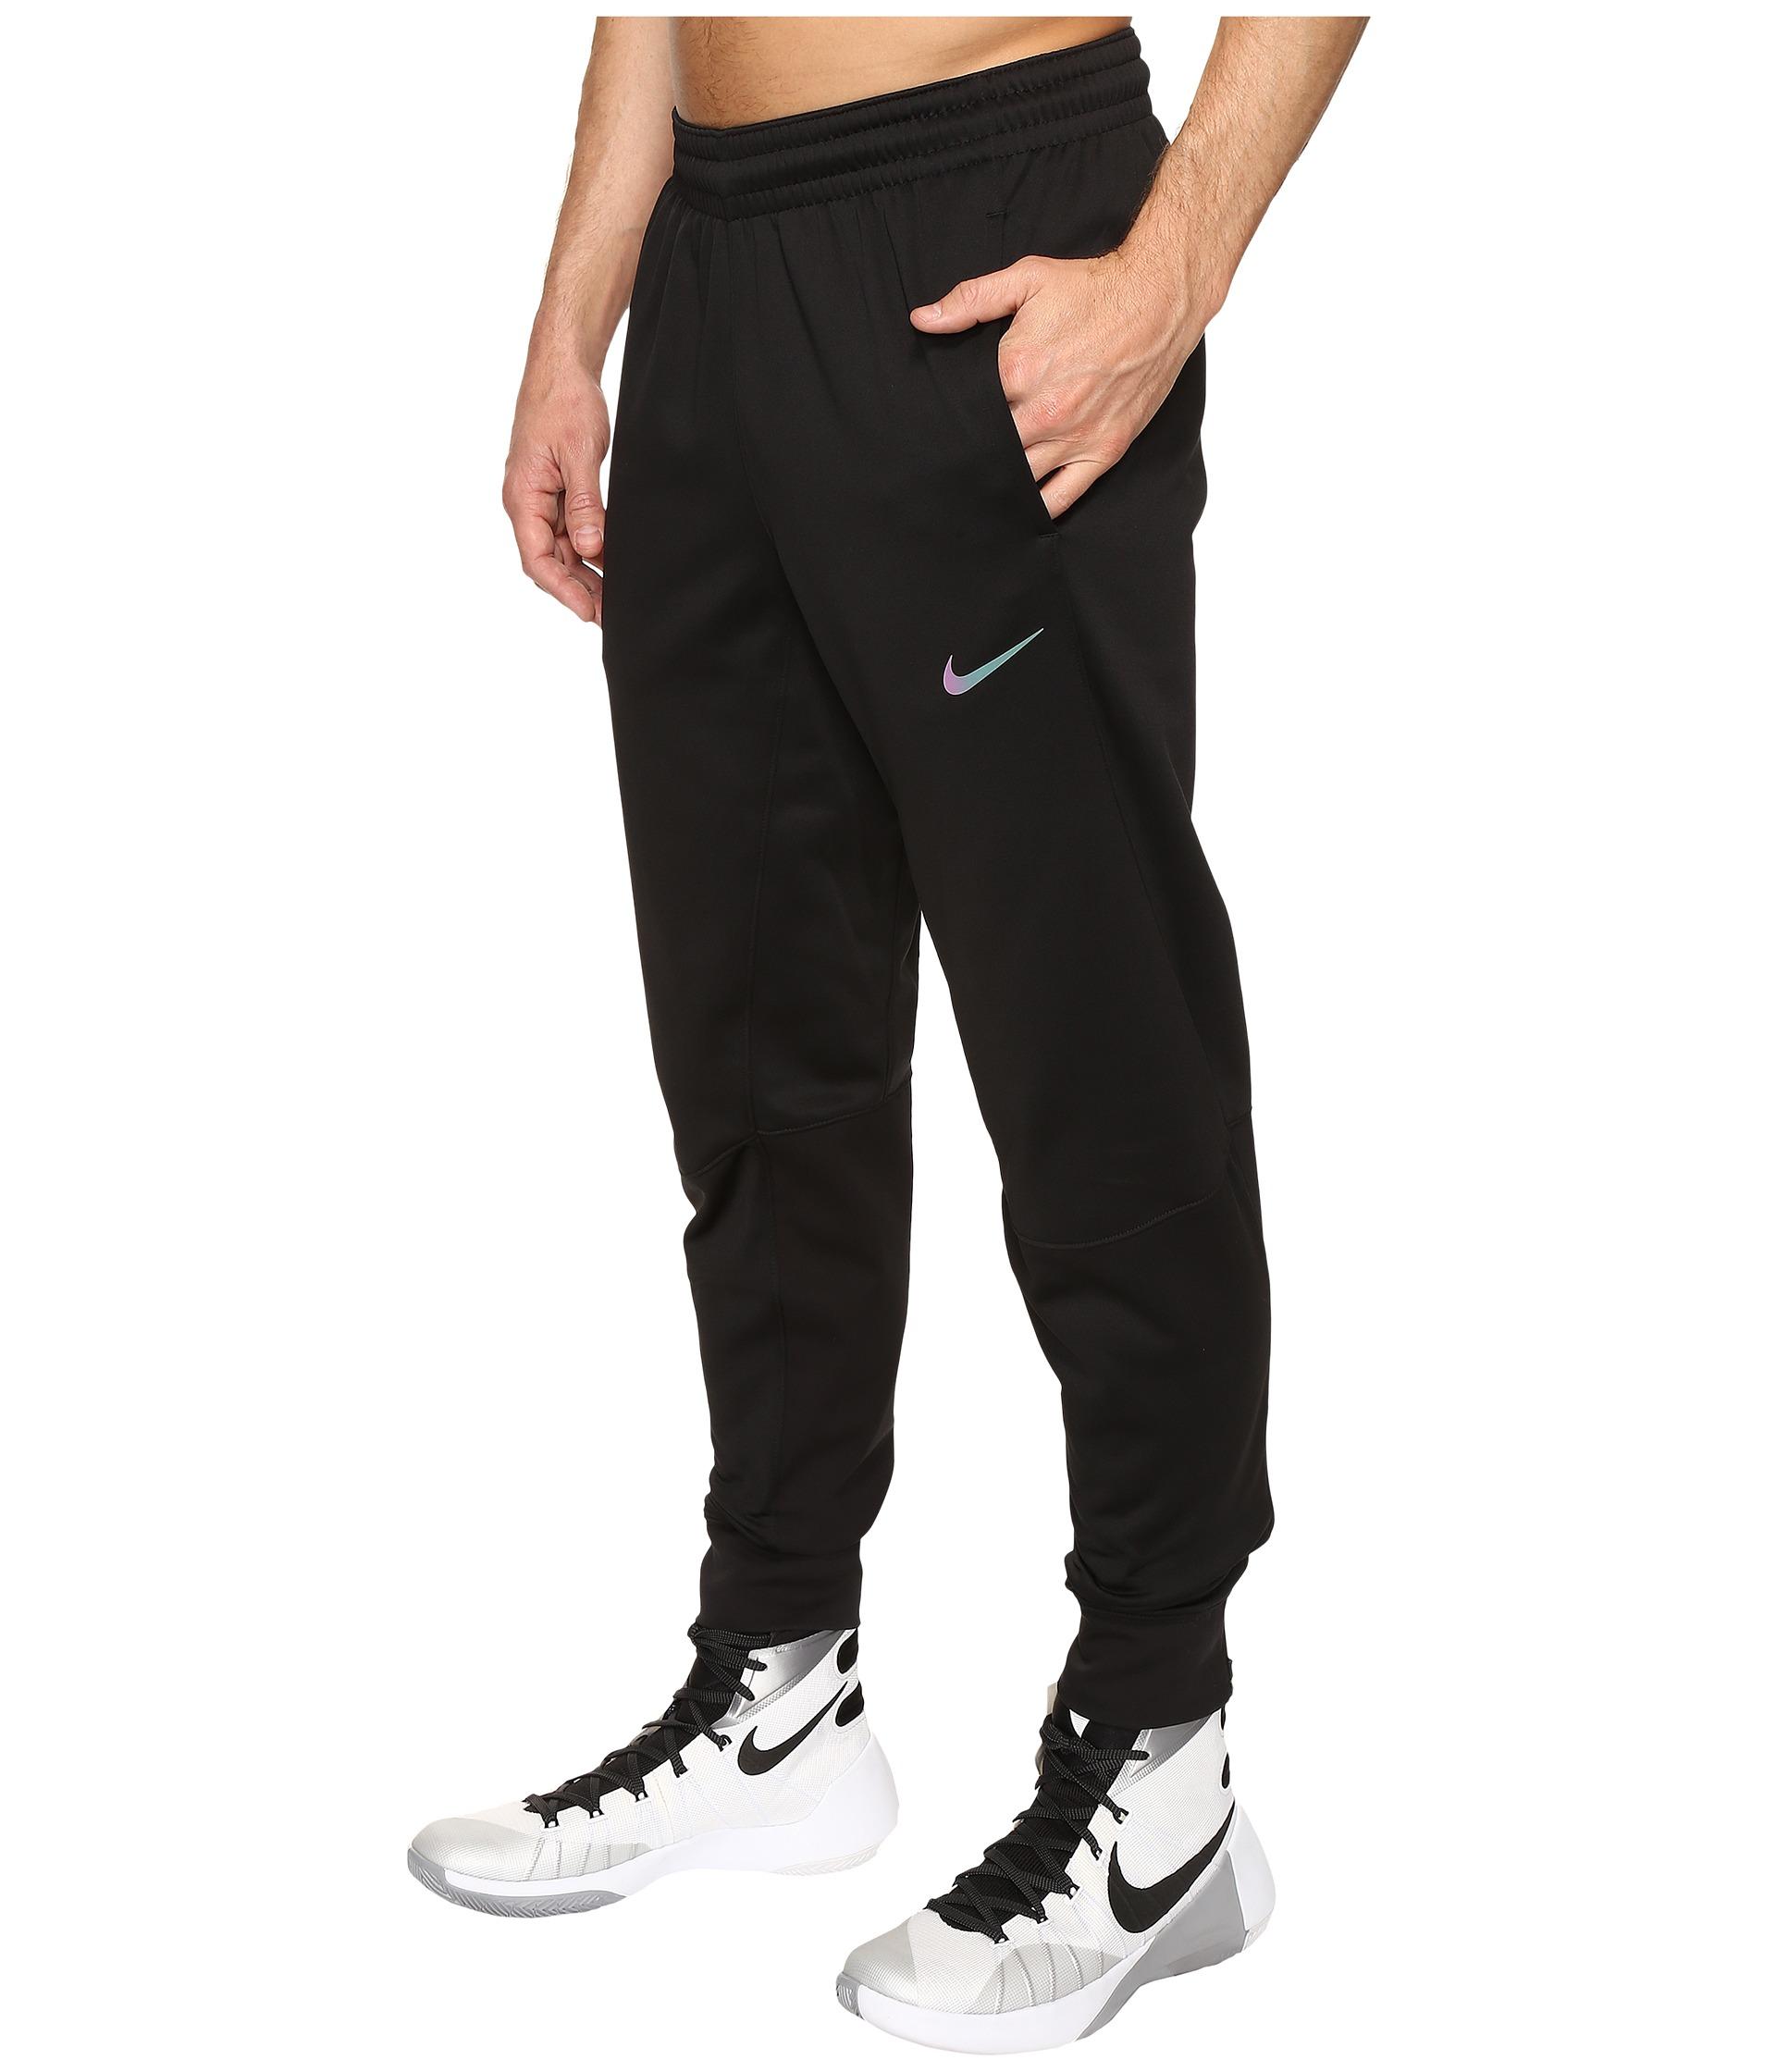 Nike Synthetic Therma Hyper Elite Basketball Pant in Black for Men - Lyst